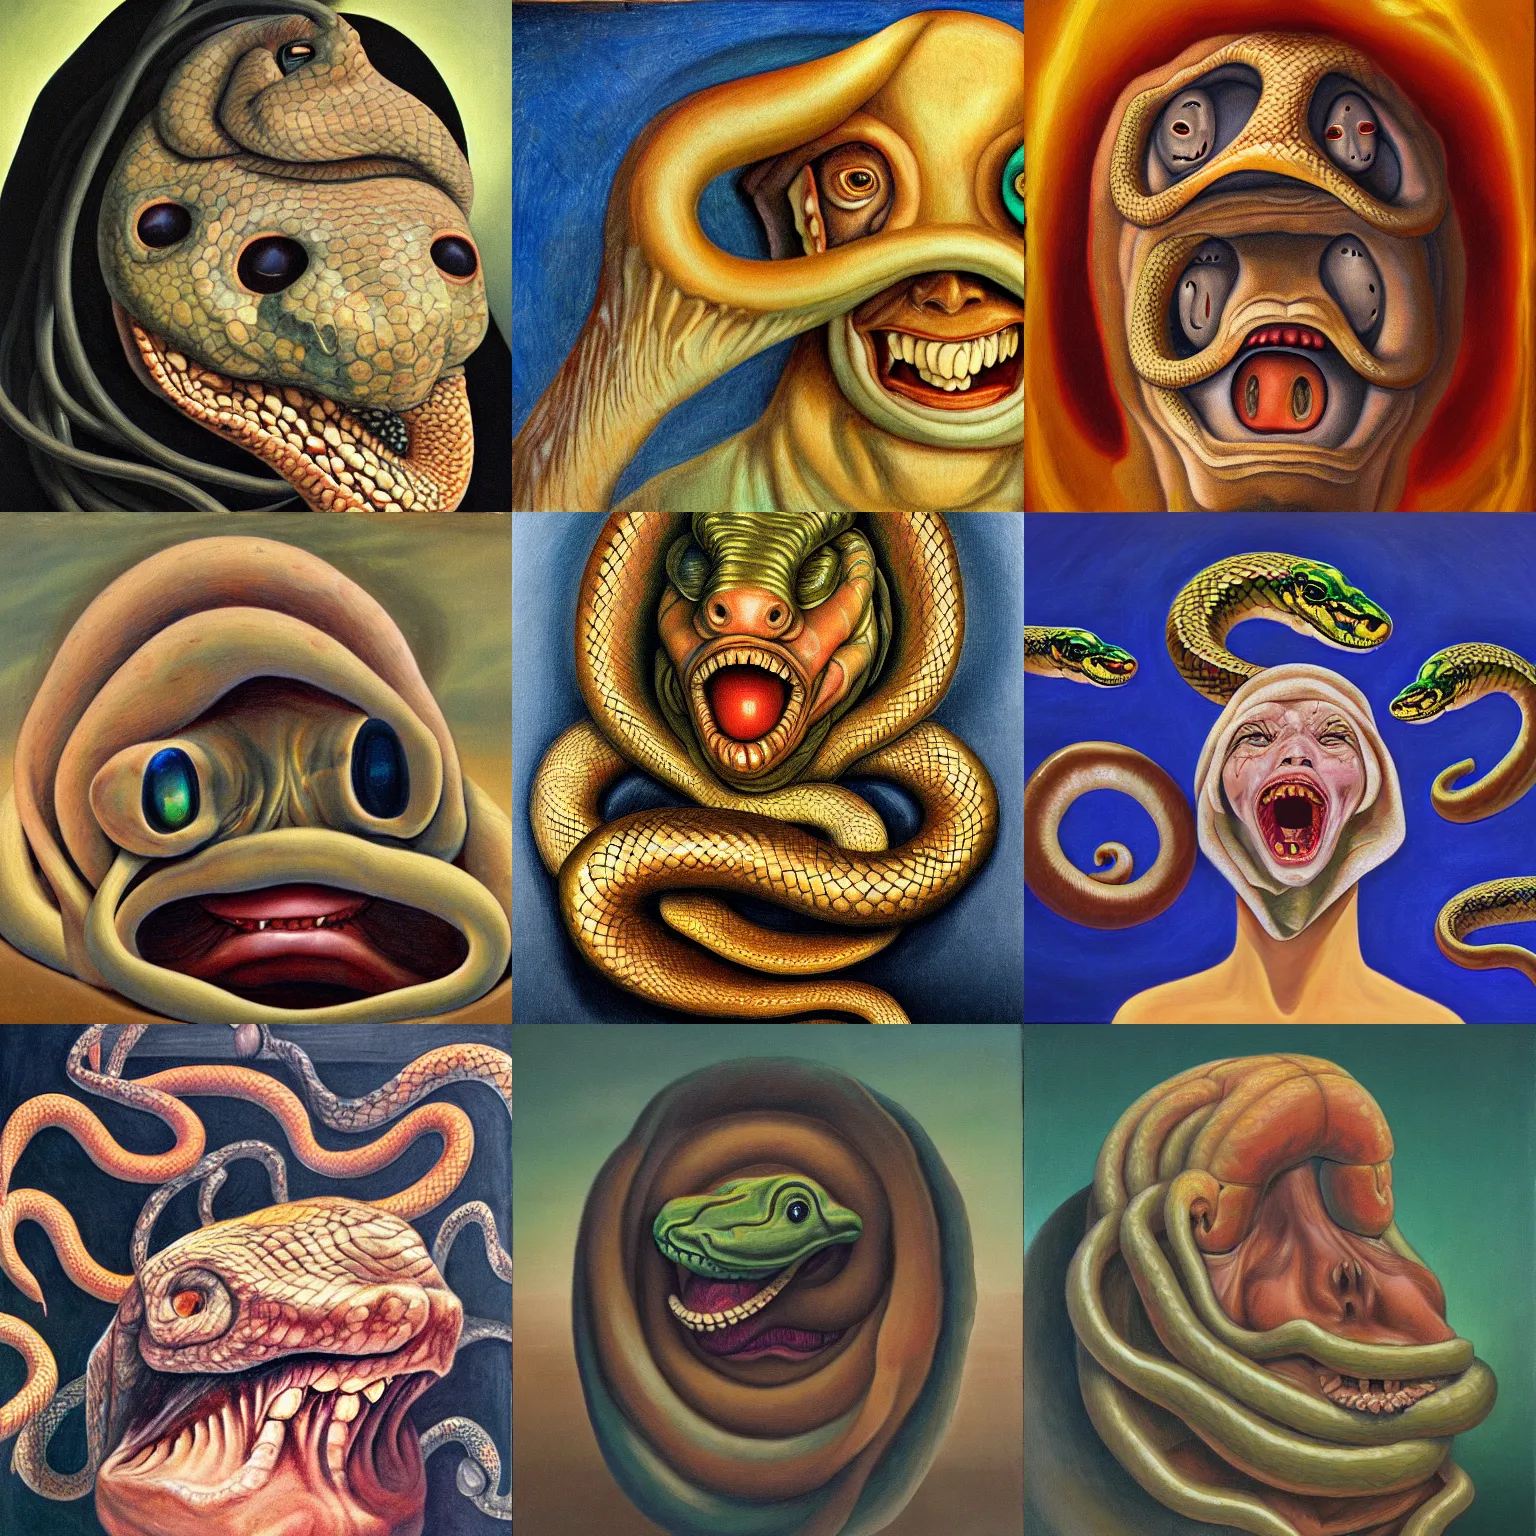 Prompt: A disembodied head screams, snakes slither out of the mouth and wrap around the head, oil painting, surrealism style